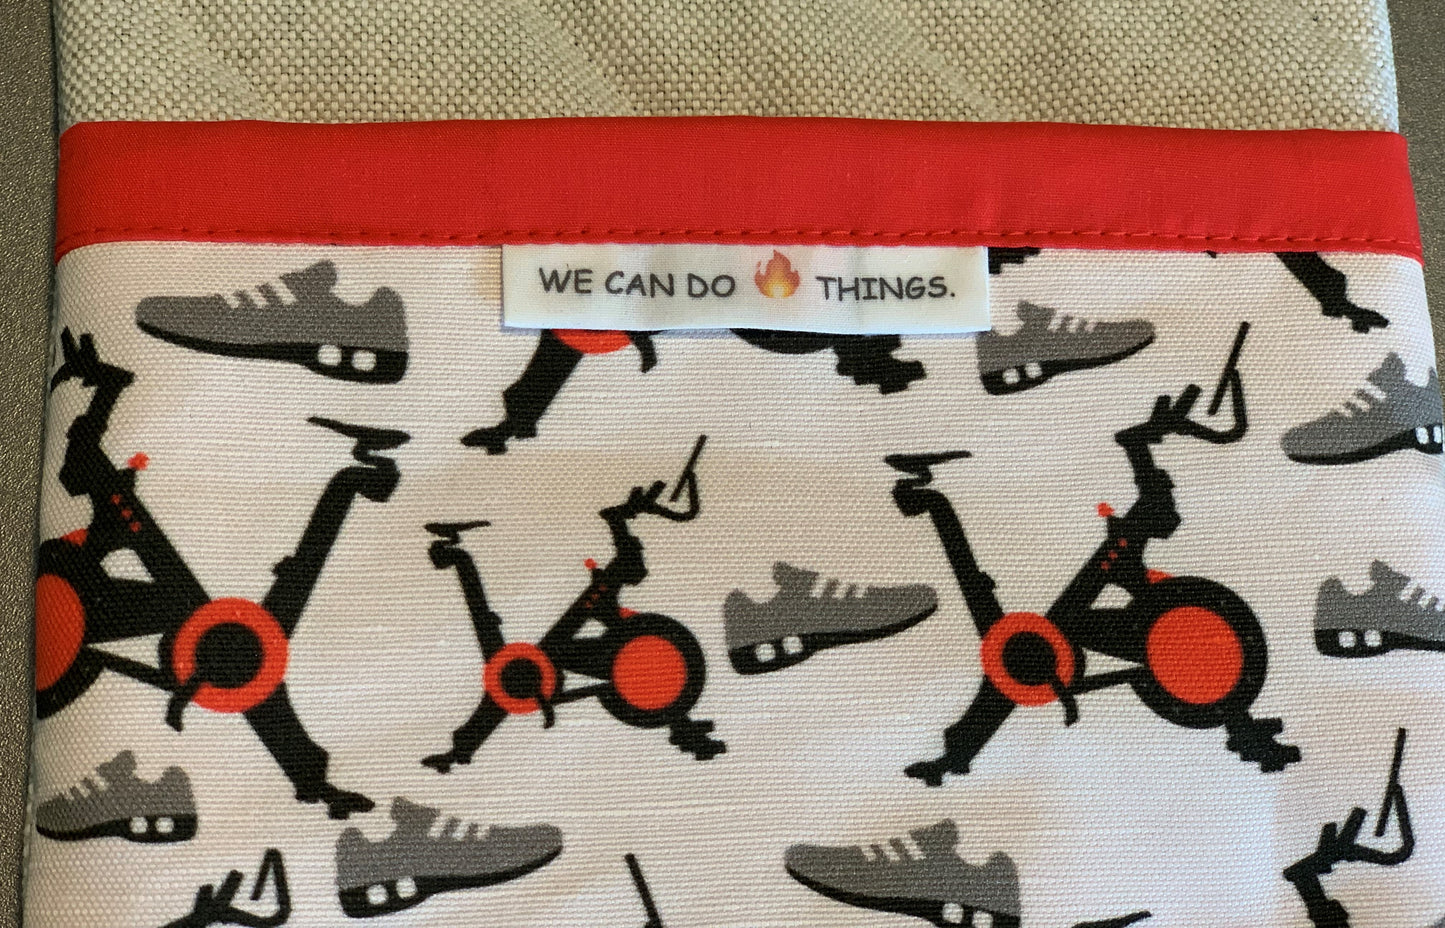 Peloton Pot Holders with Spin Bike and Shoes Fabric, "We Can Do Hot Things"